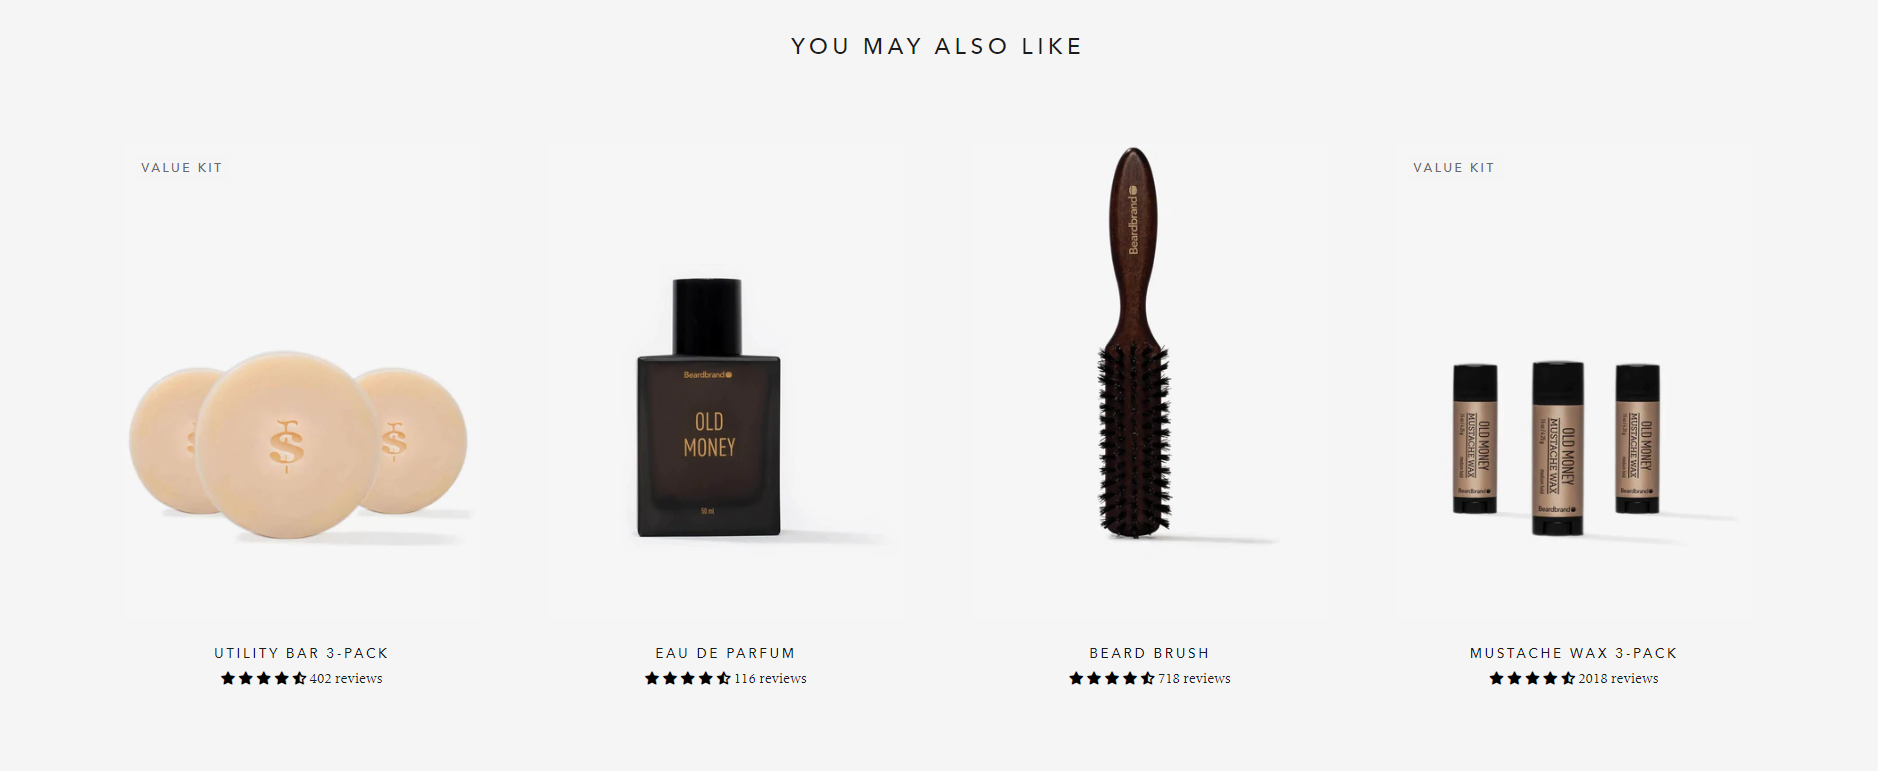 Recommendations for related products on Beardbrand's website